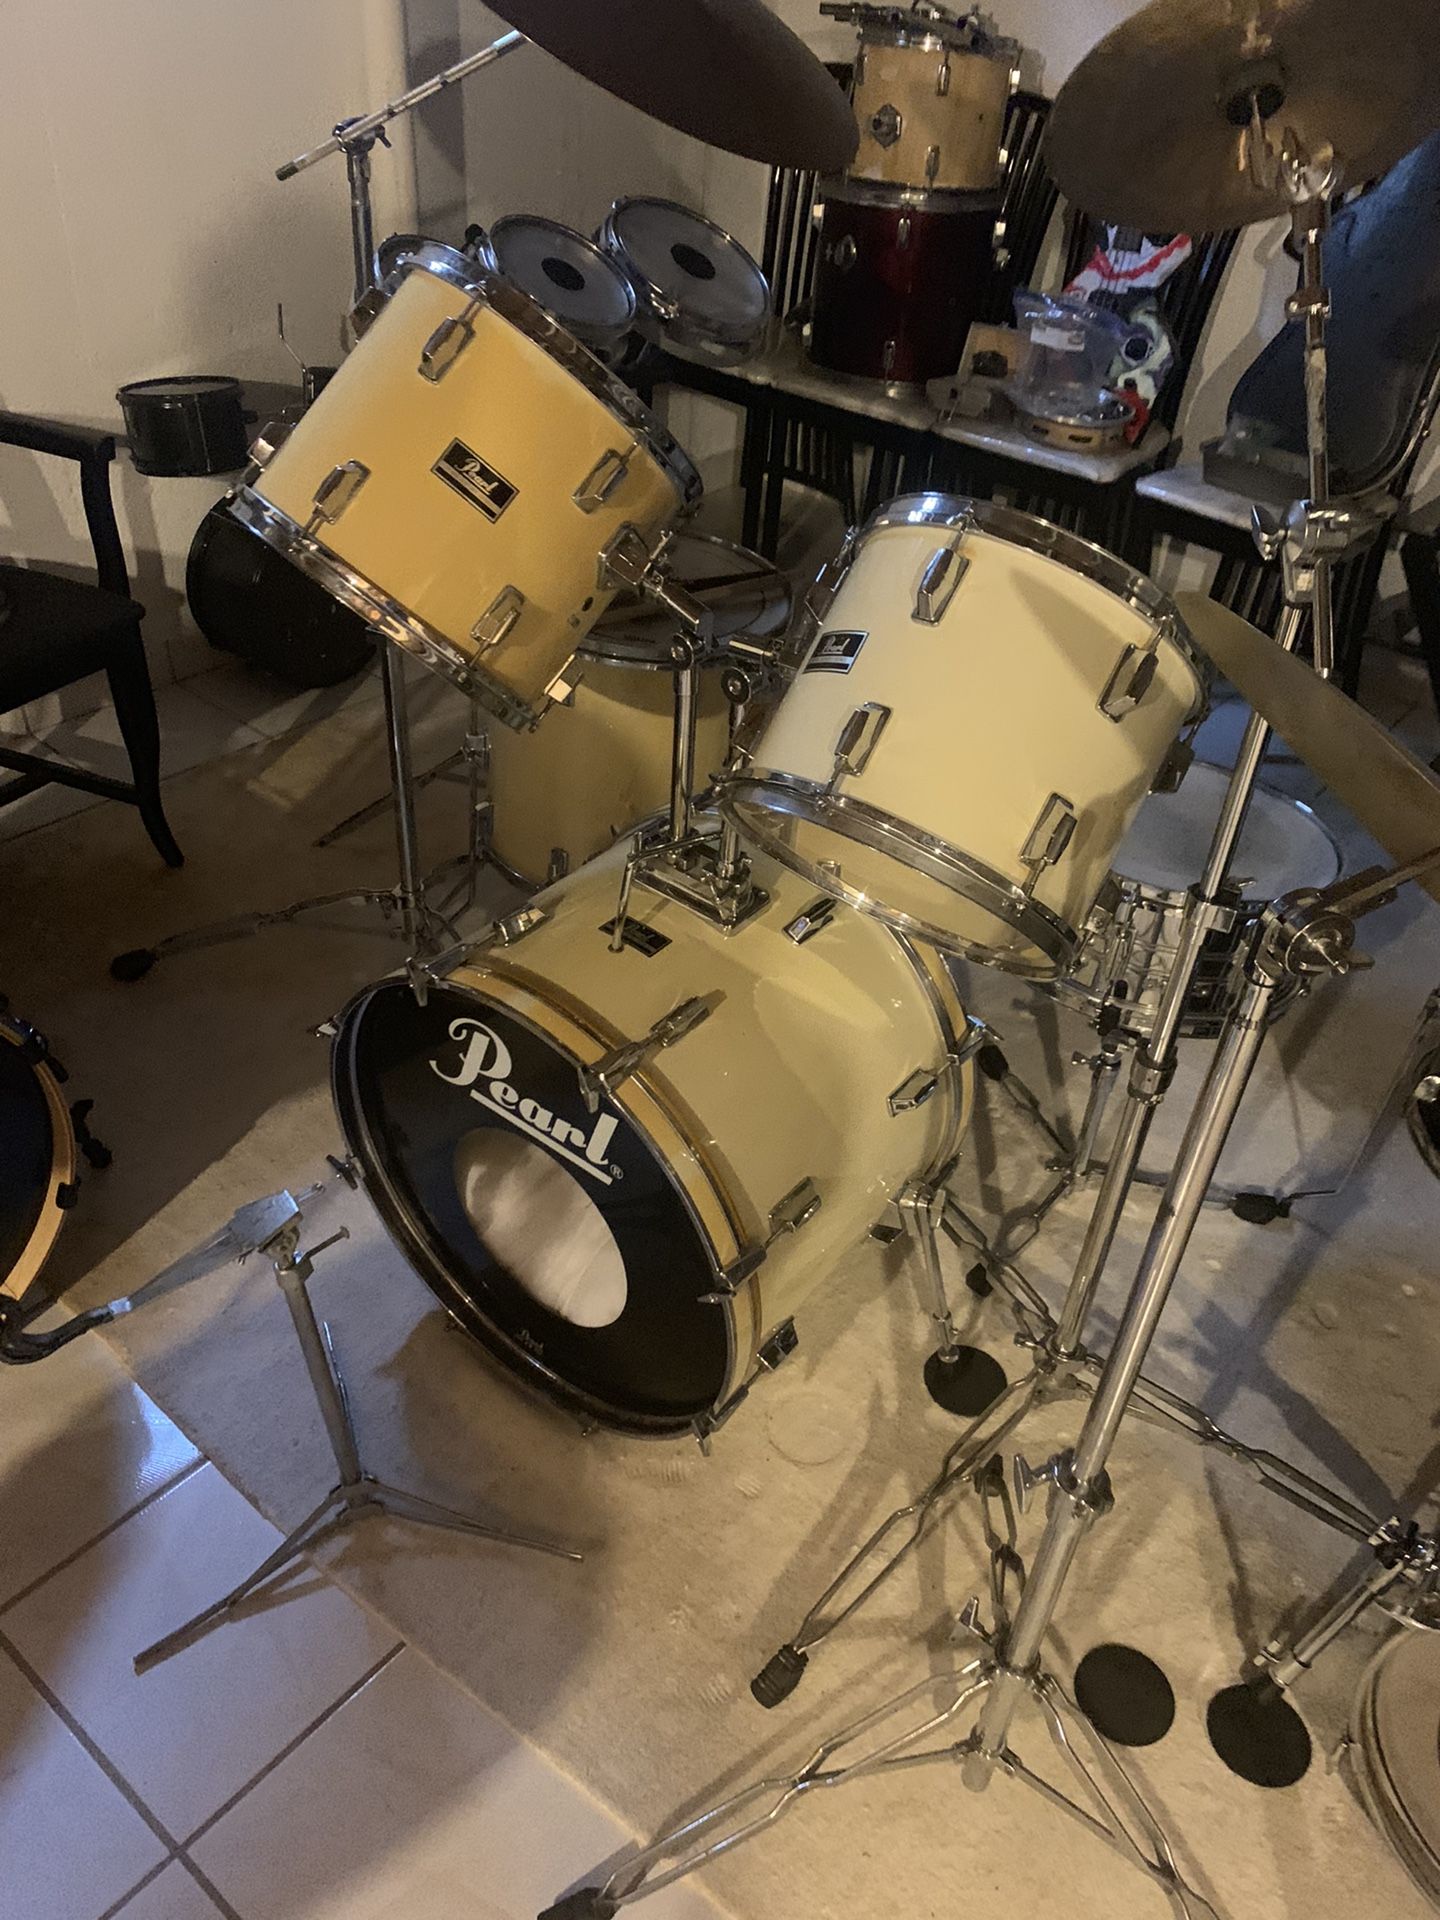 Vintage   Pearl Drums   Complete  Well Maintained  